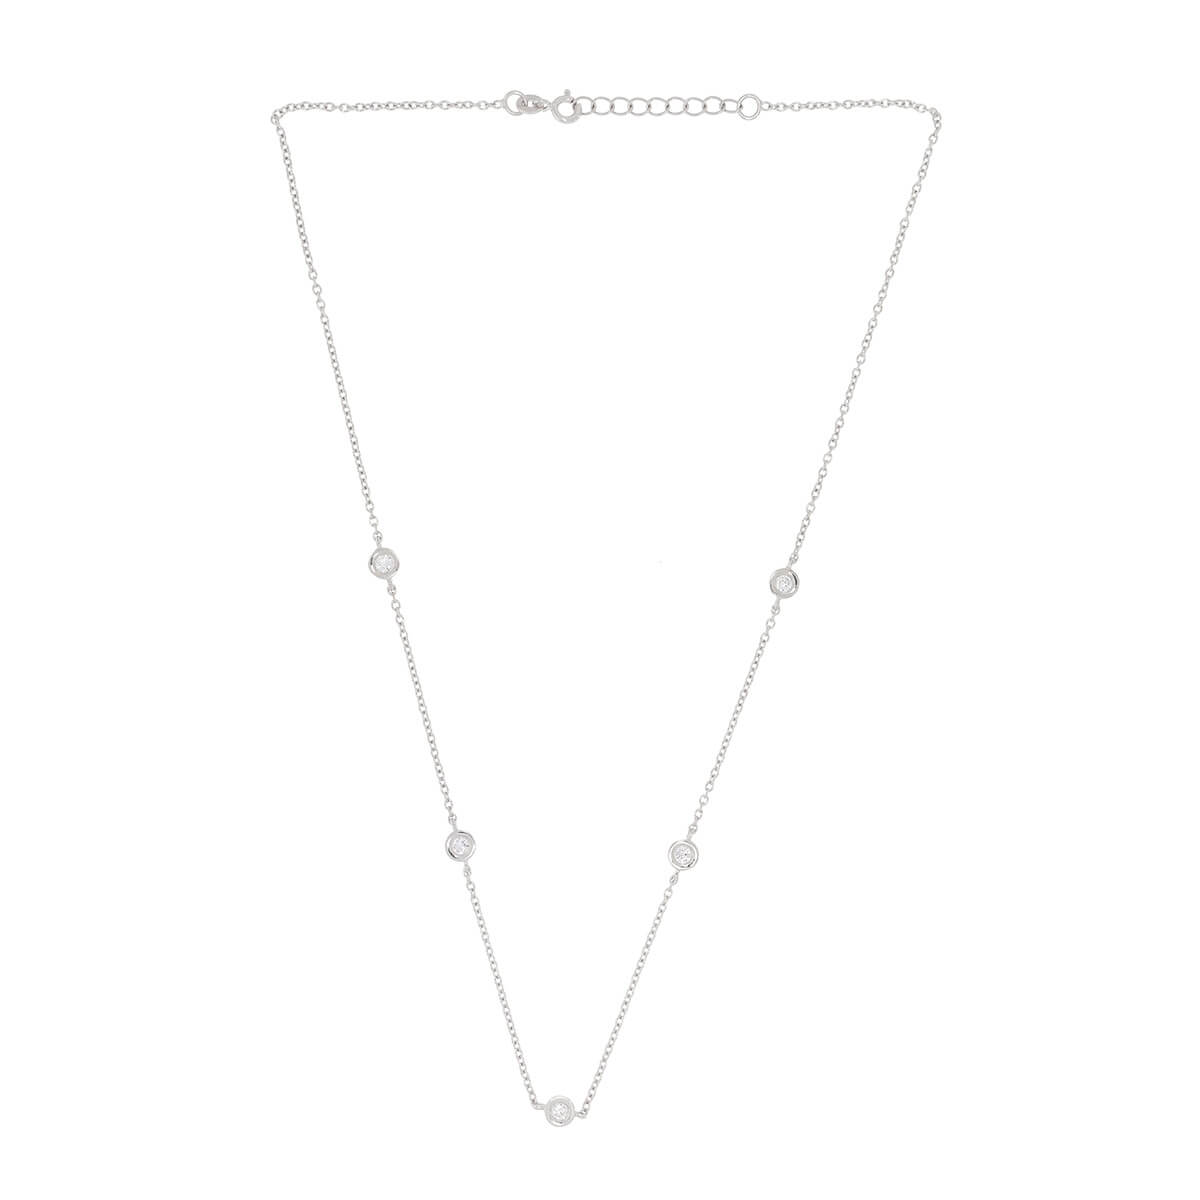 Blissful Charm Silver Necklace